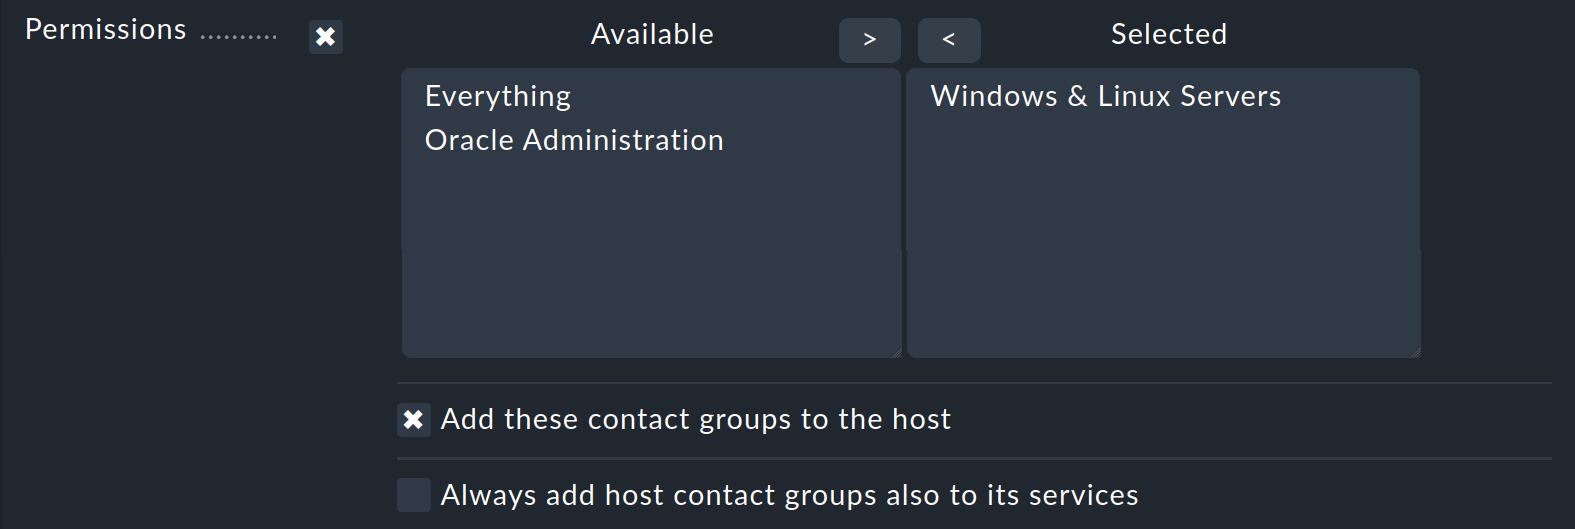 Dialog for assigning contact groups to hosts in the host properties.